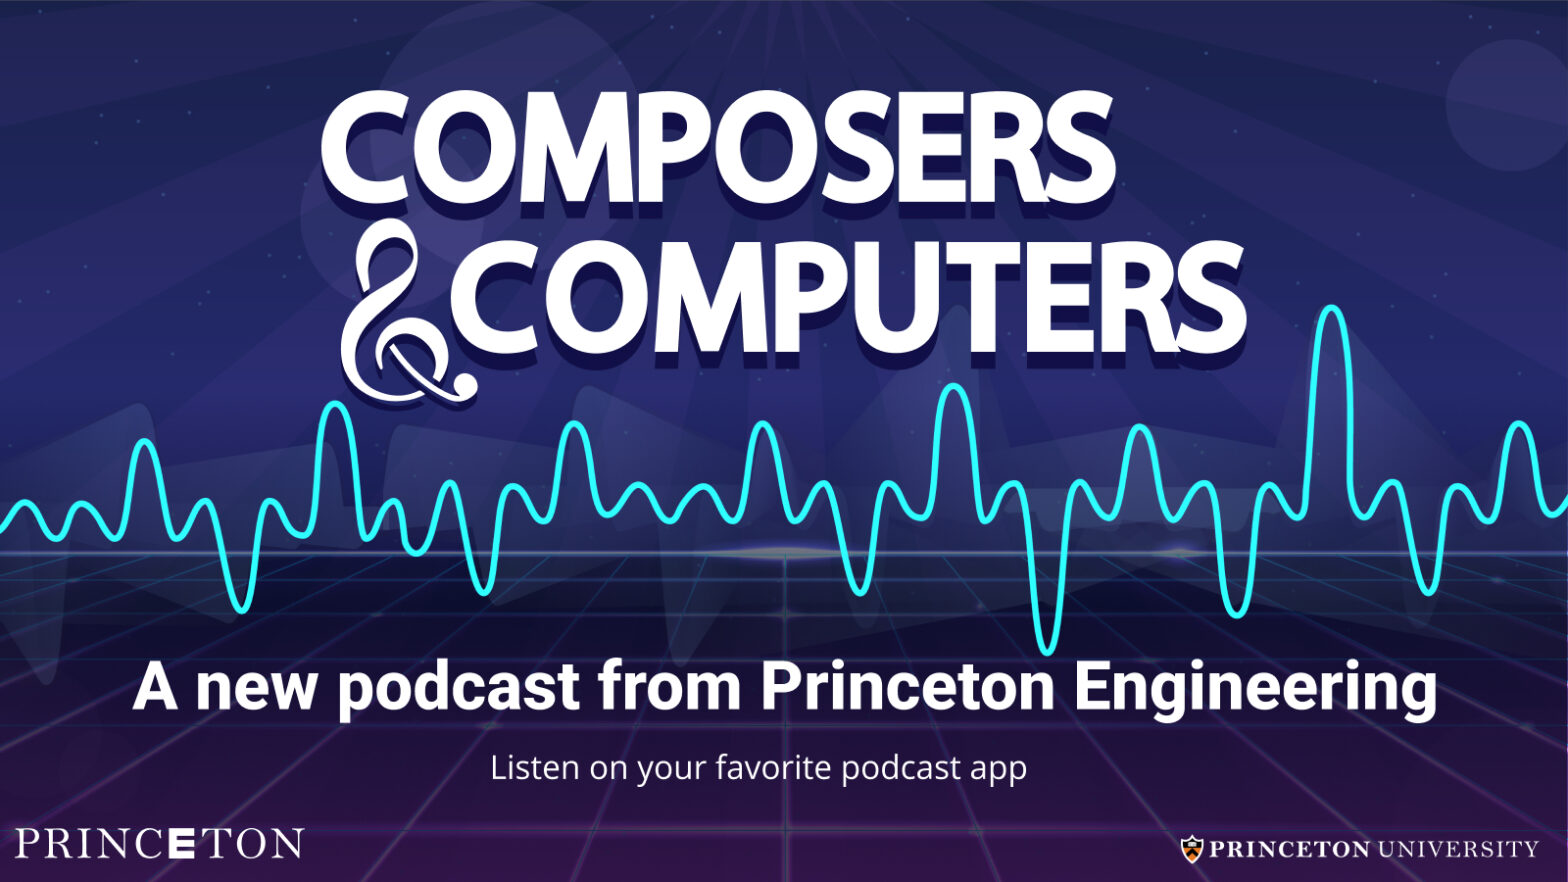 Composers & Computers, a new podcast from Princeton Engineering. The ampersand is shaped like a treble clef. Below it is a sound wave illustration.